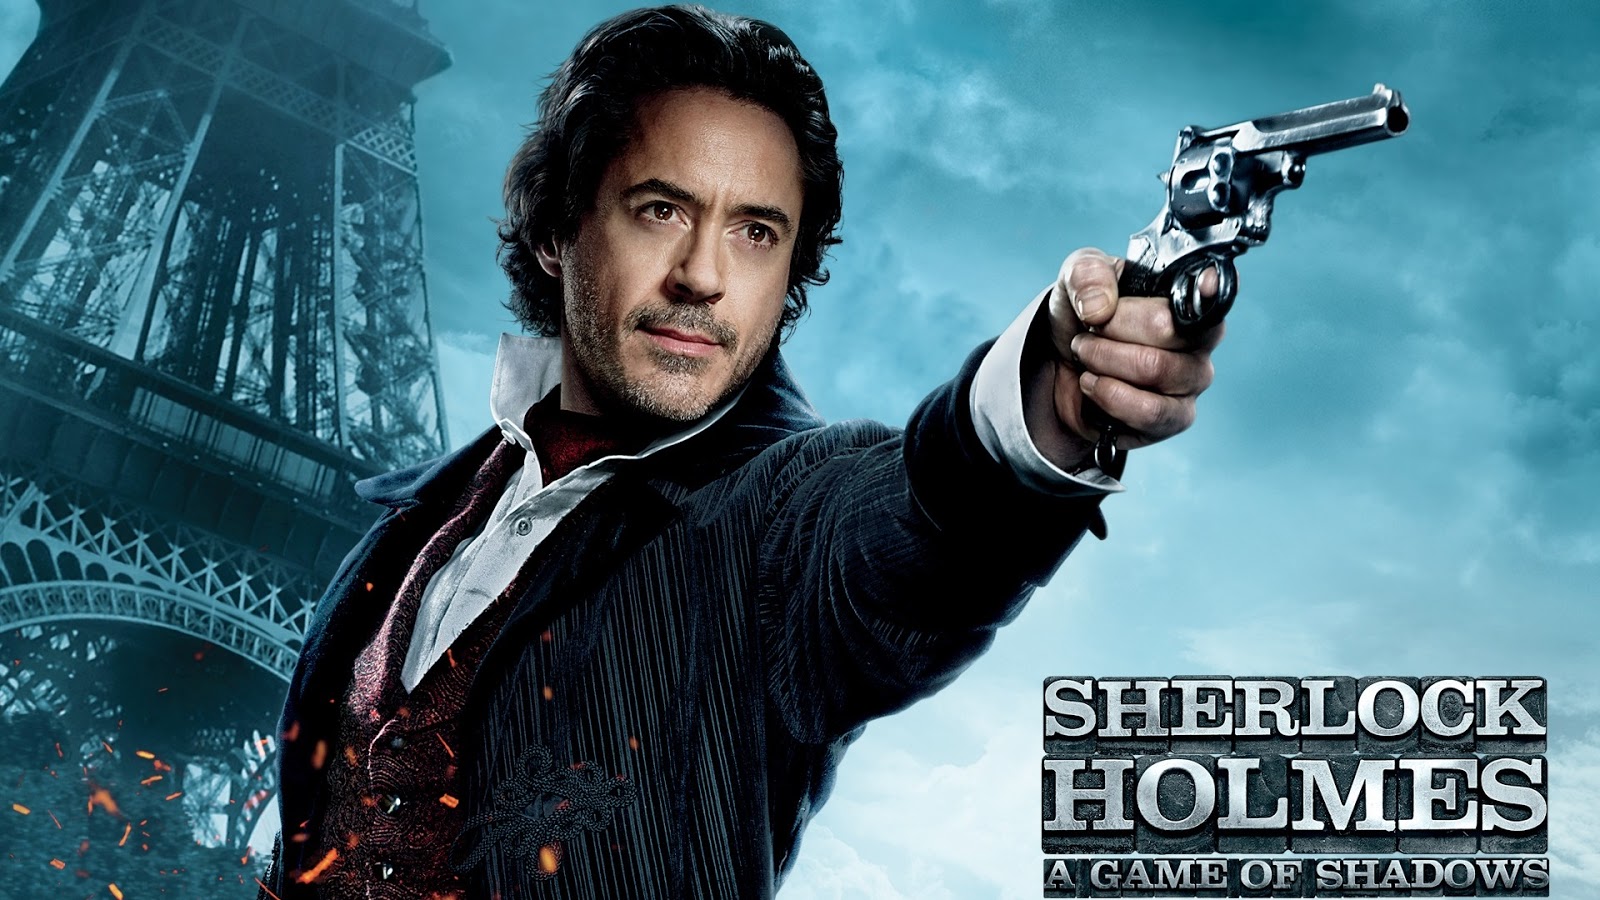 sherlock holmes hd wallpaper,movie,action film,action adventure game,photography,fictional character